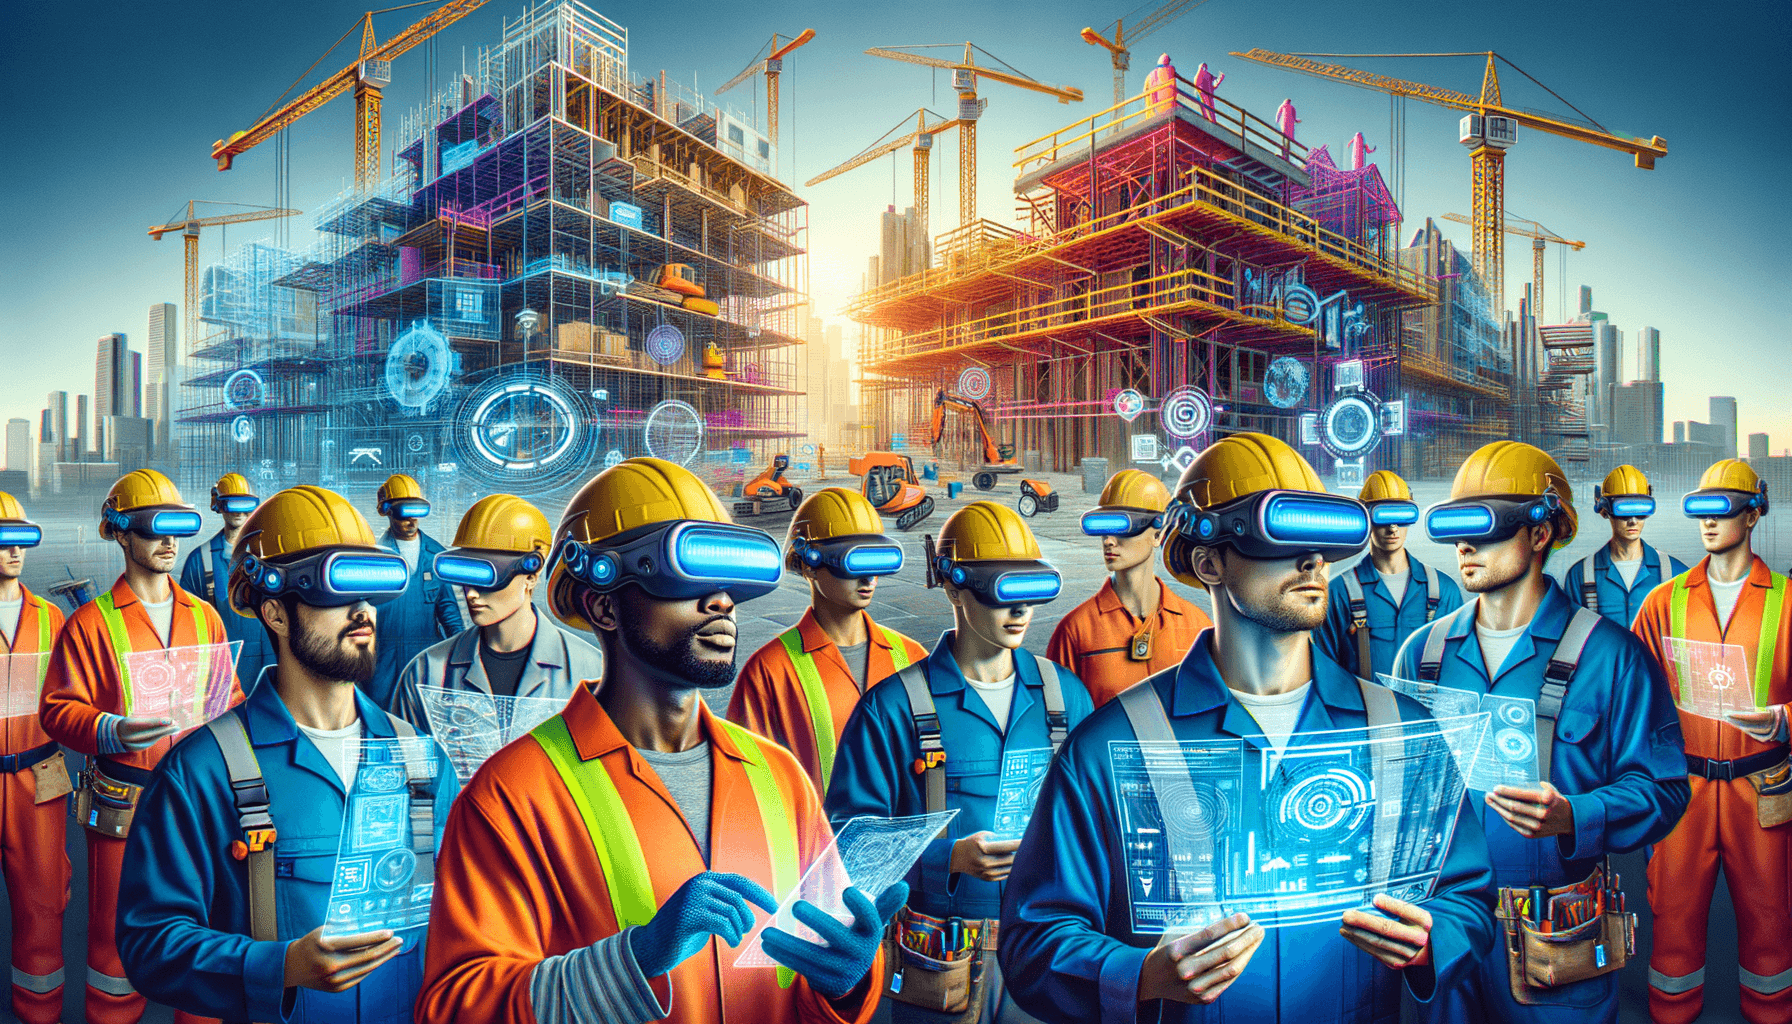 "Revolutionizing Construction: Augmented Reality by Gravity Jack Boosts Maintenance with Real-Time Data and Wearable Tech"